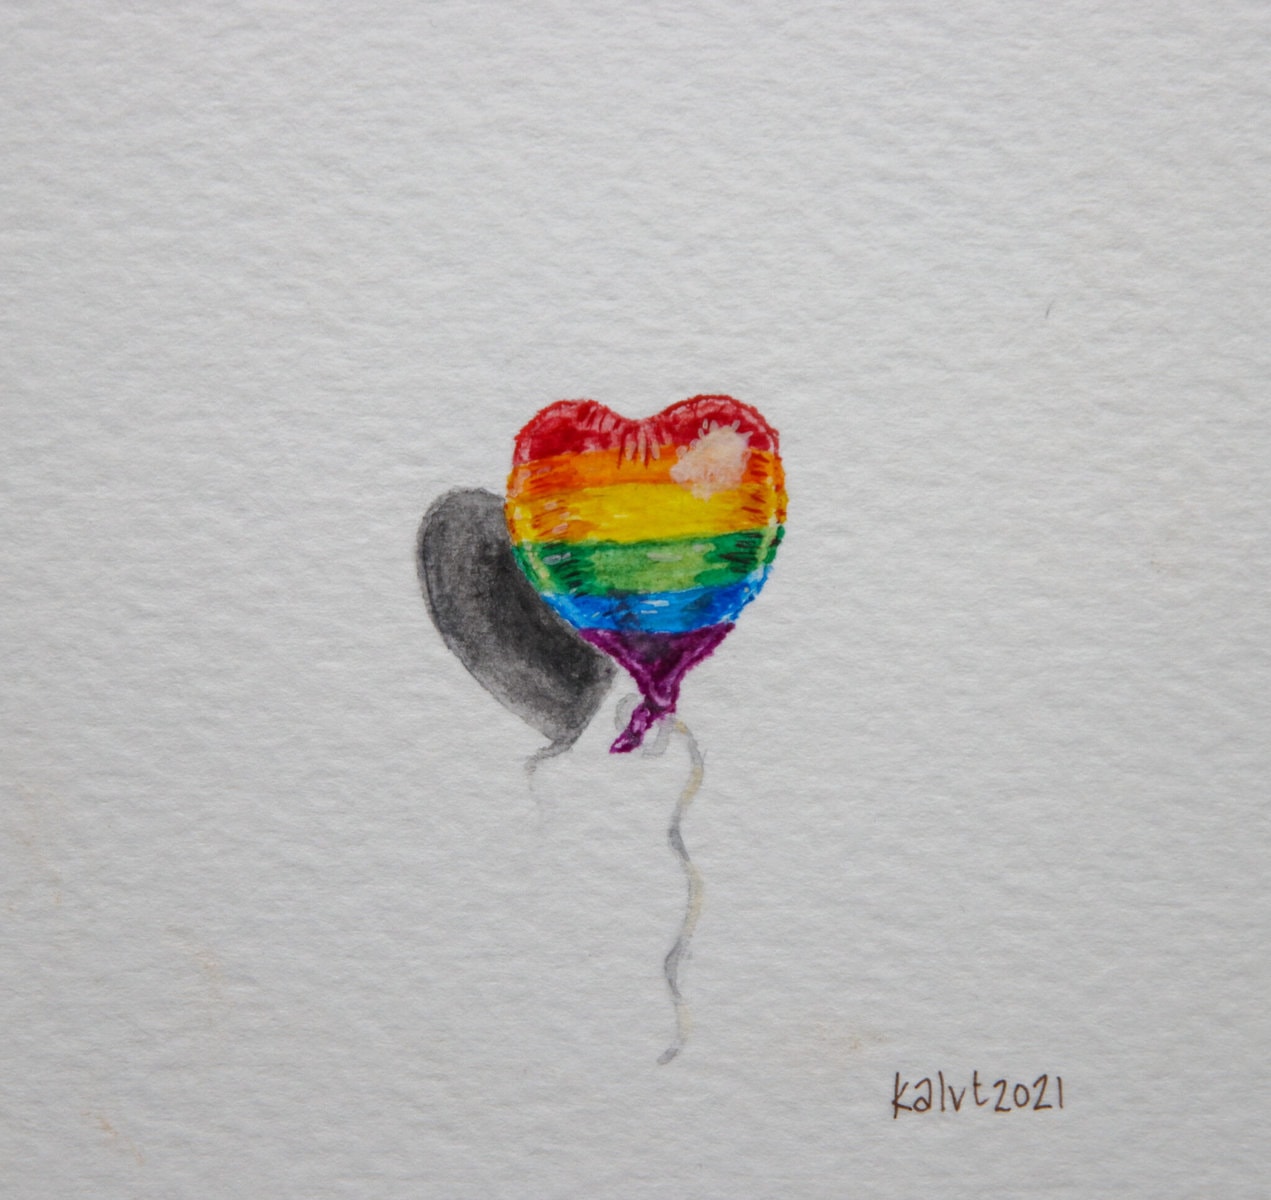 My art piece "God is love". Small, and “teeny-tiny”, are often conversation pieces. That is what I was aiming for. I longed for people to talk about a piece- without having to talk about the artist